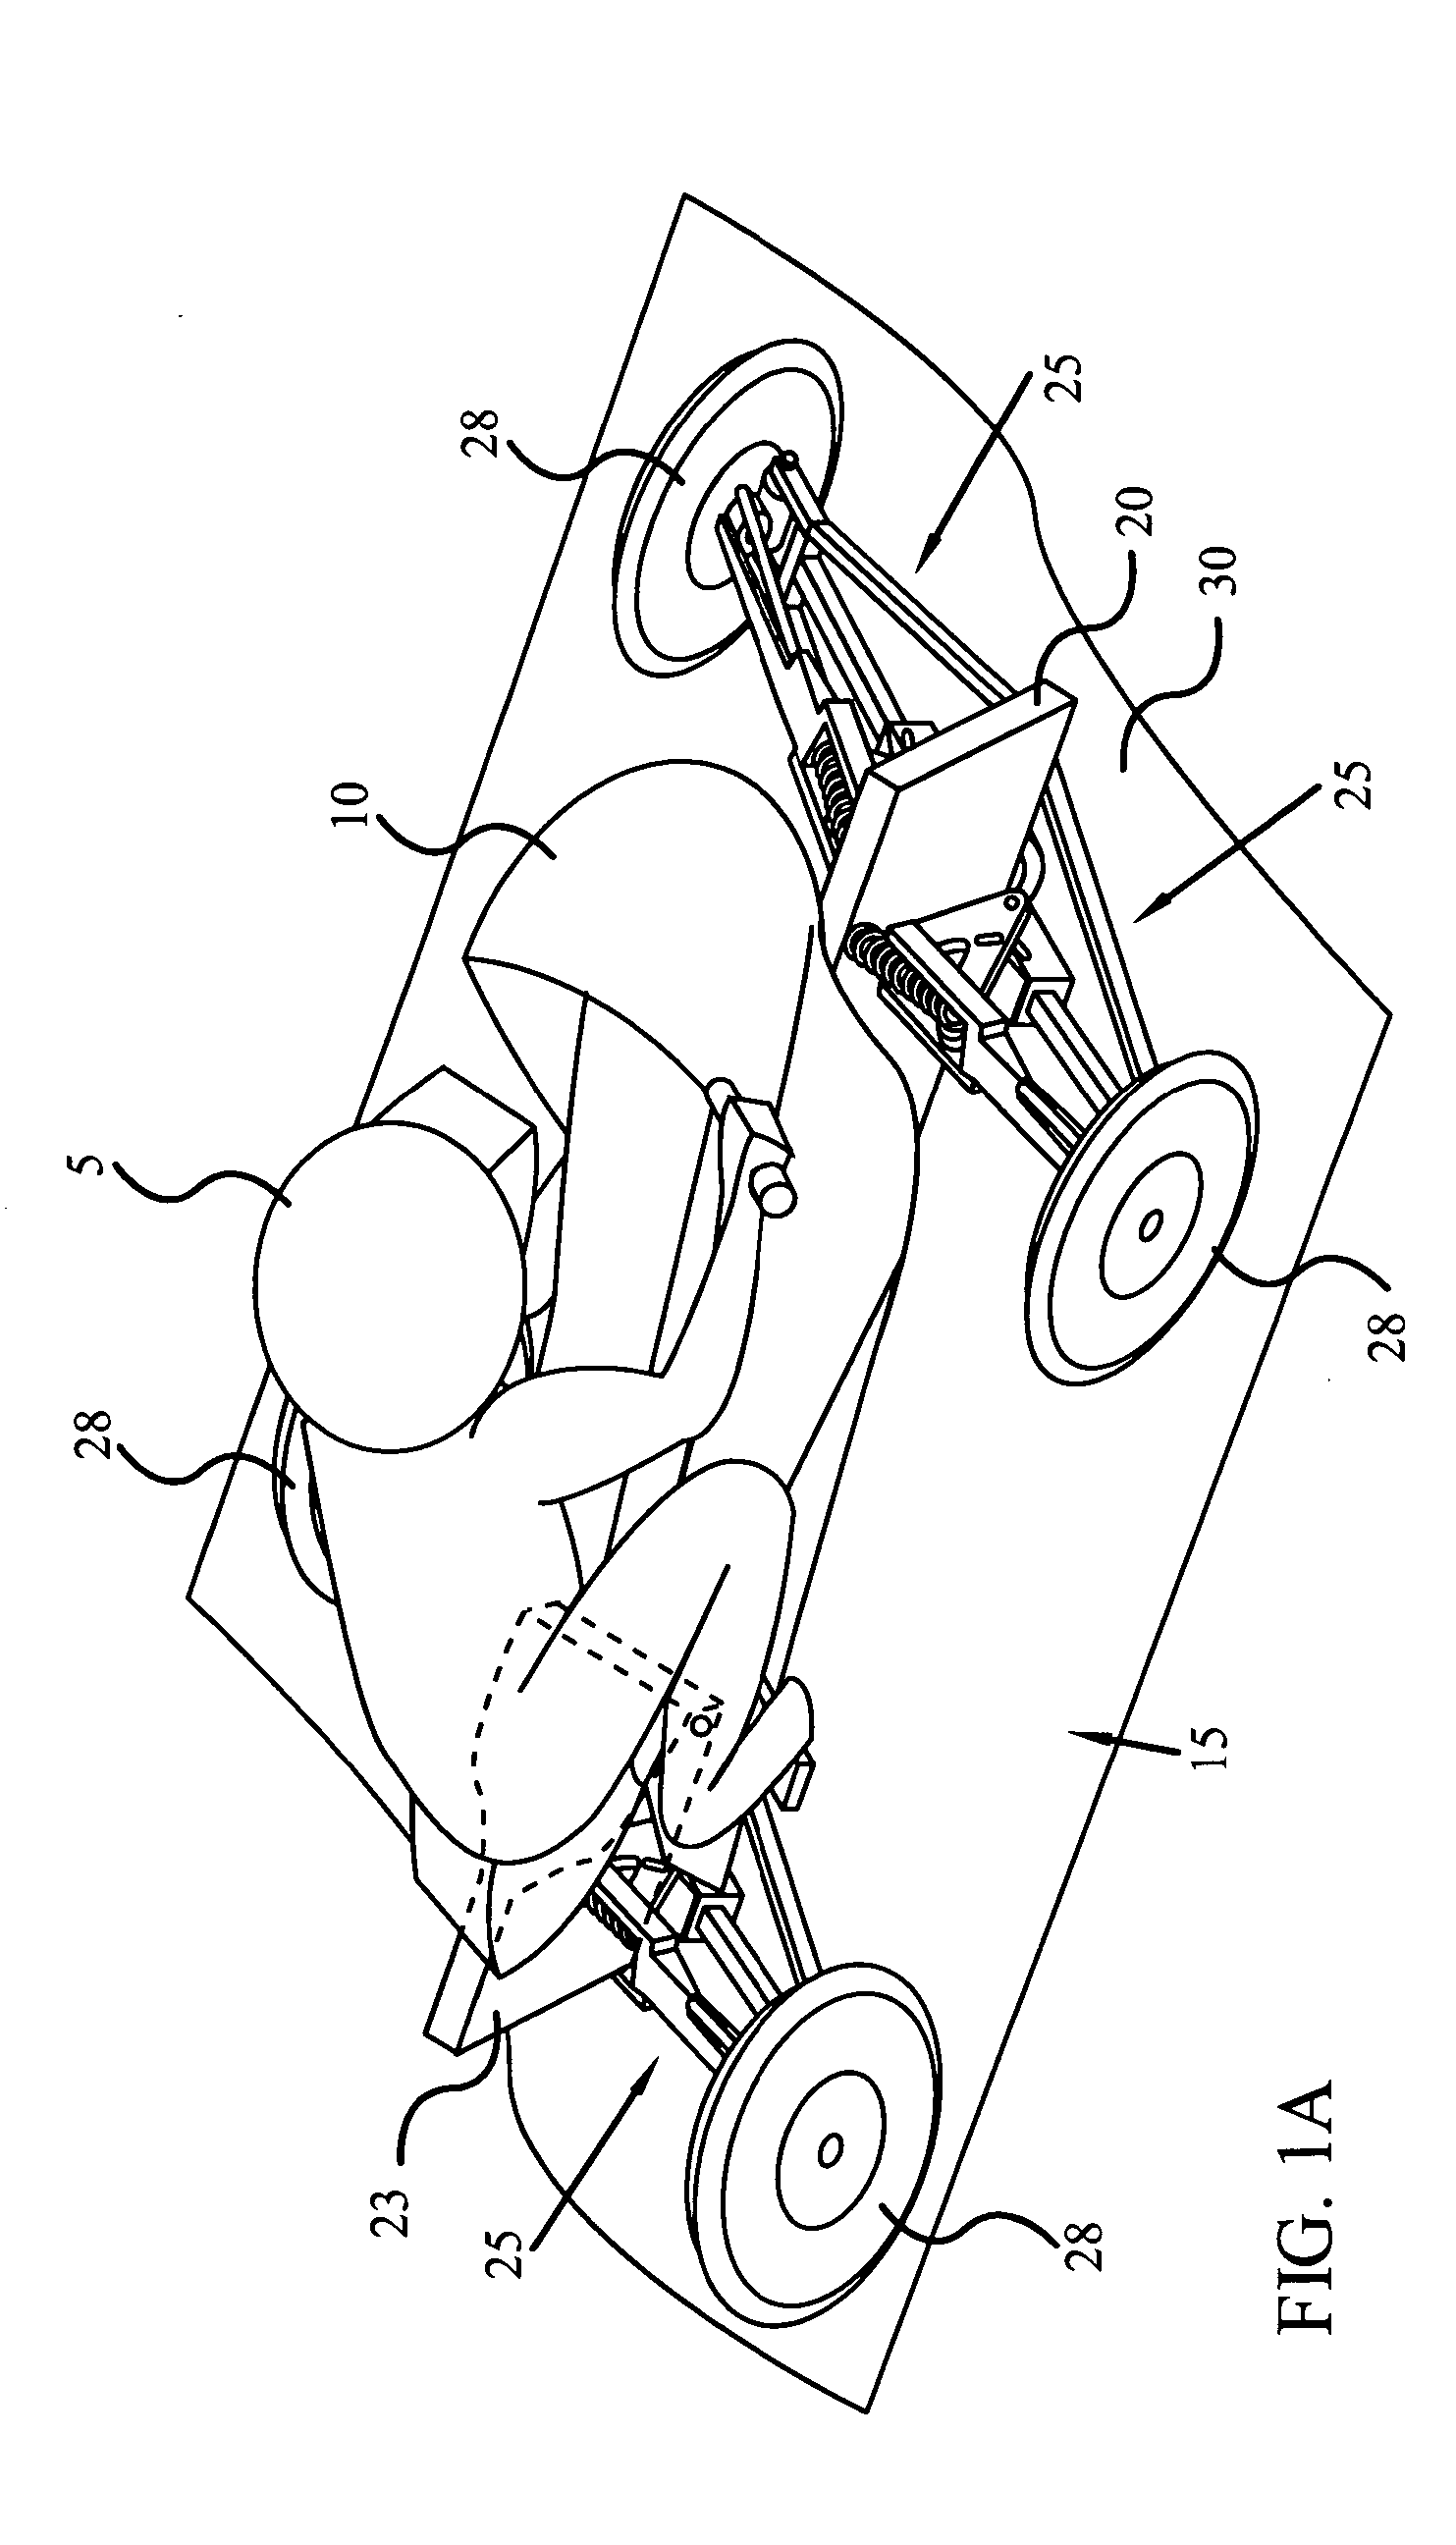 Vehicle lean and alignment control system